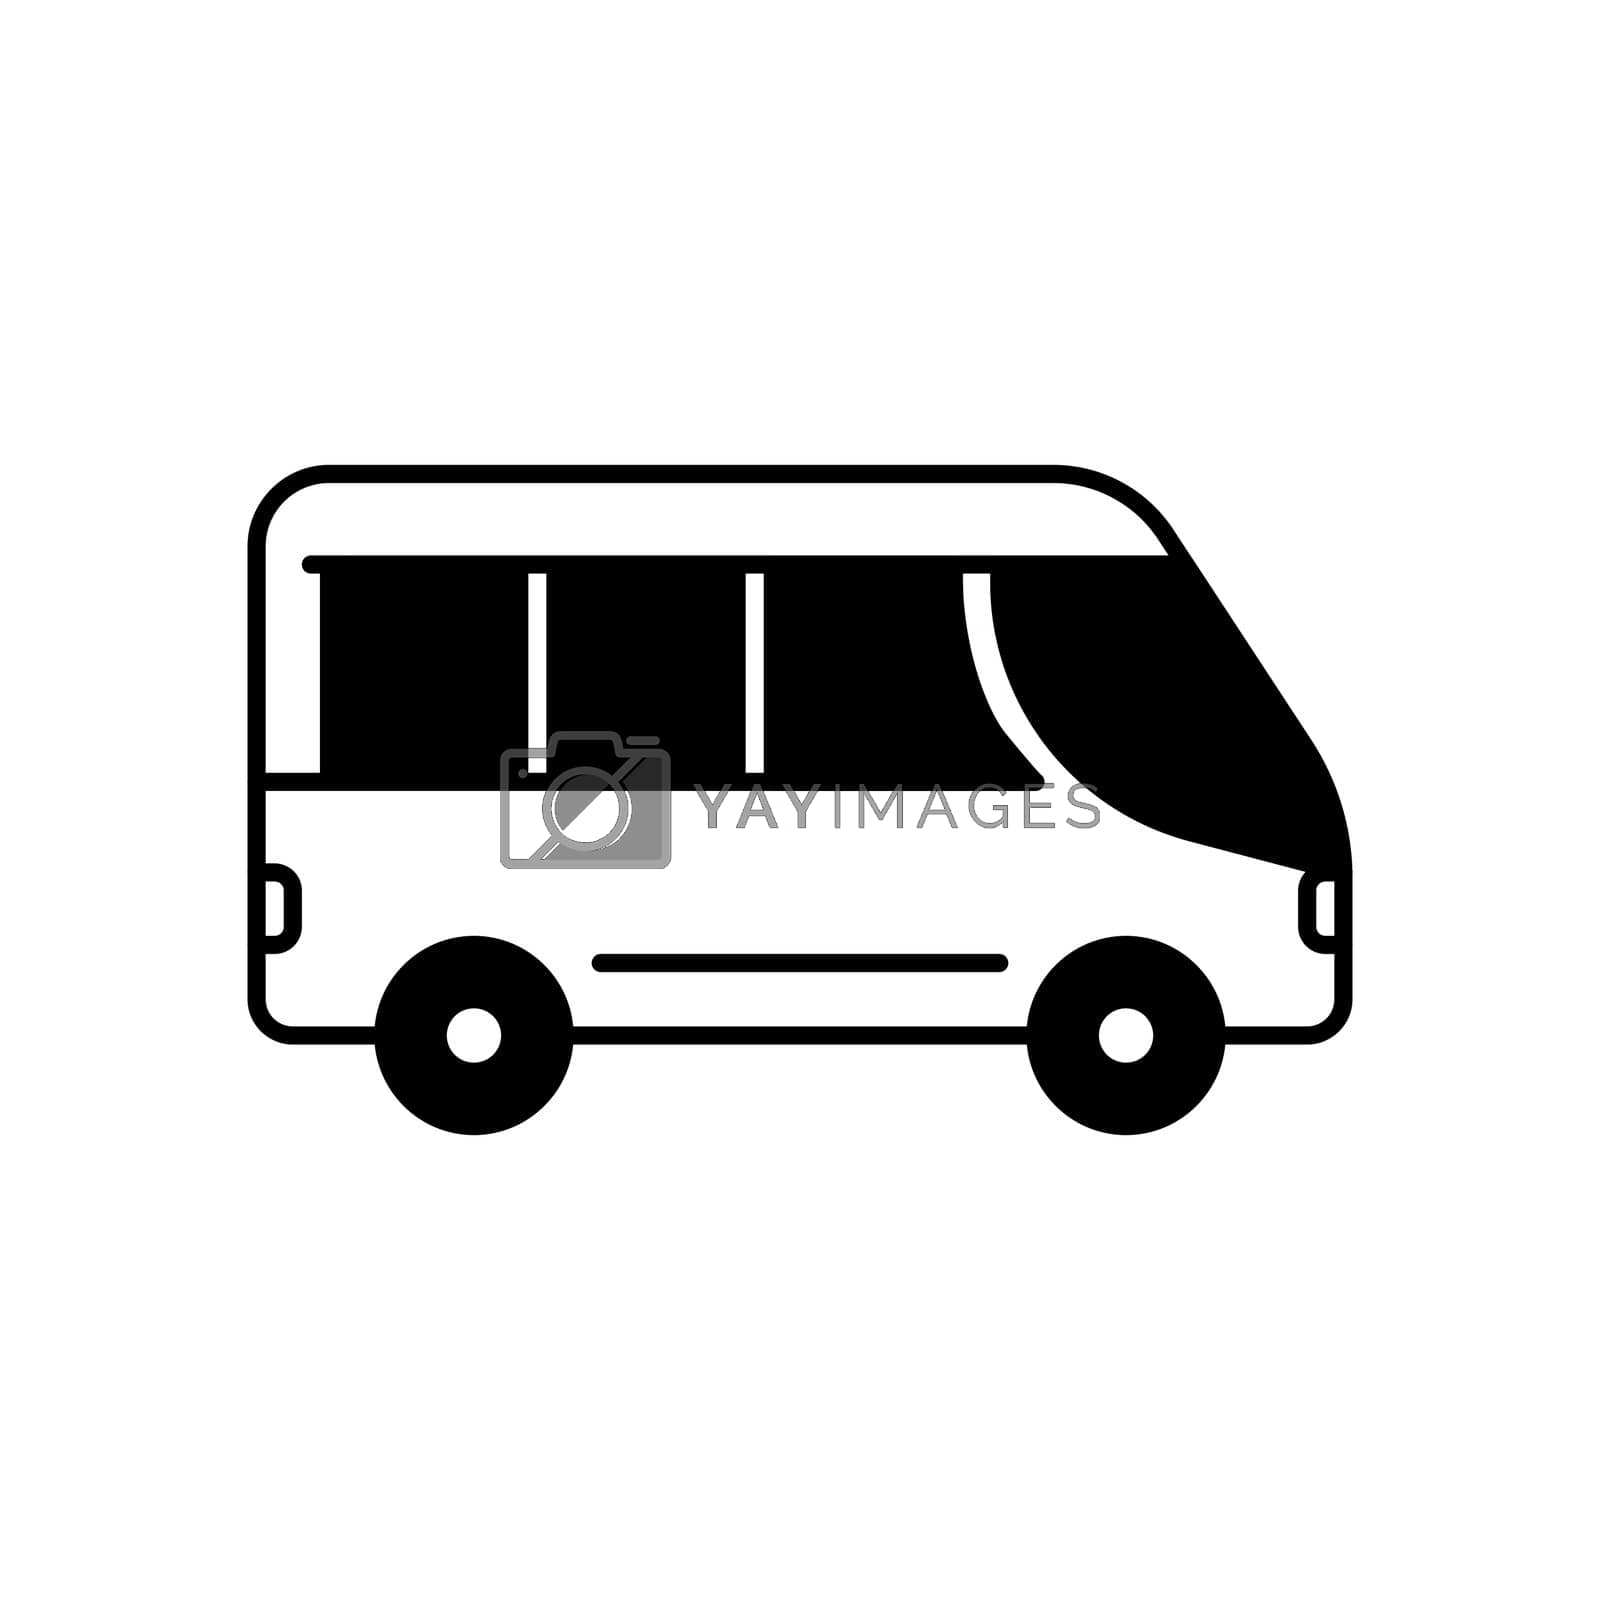 Royalty free image of Bus Icon, Travel Anywhere by Bus, to reduce emissions. by adityaslogos